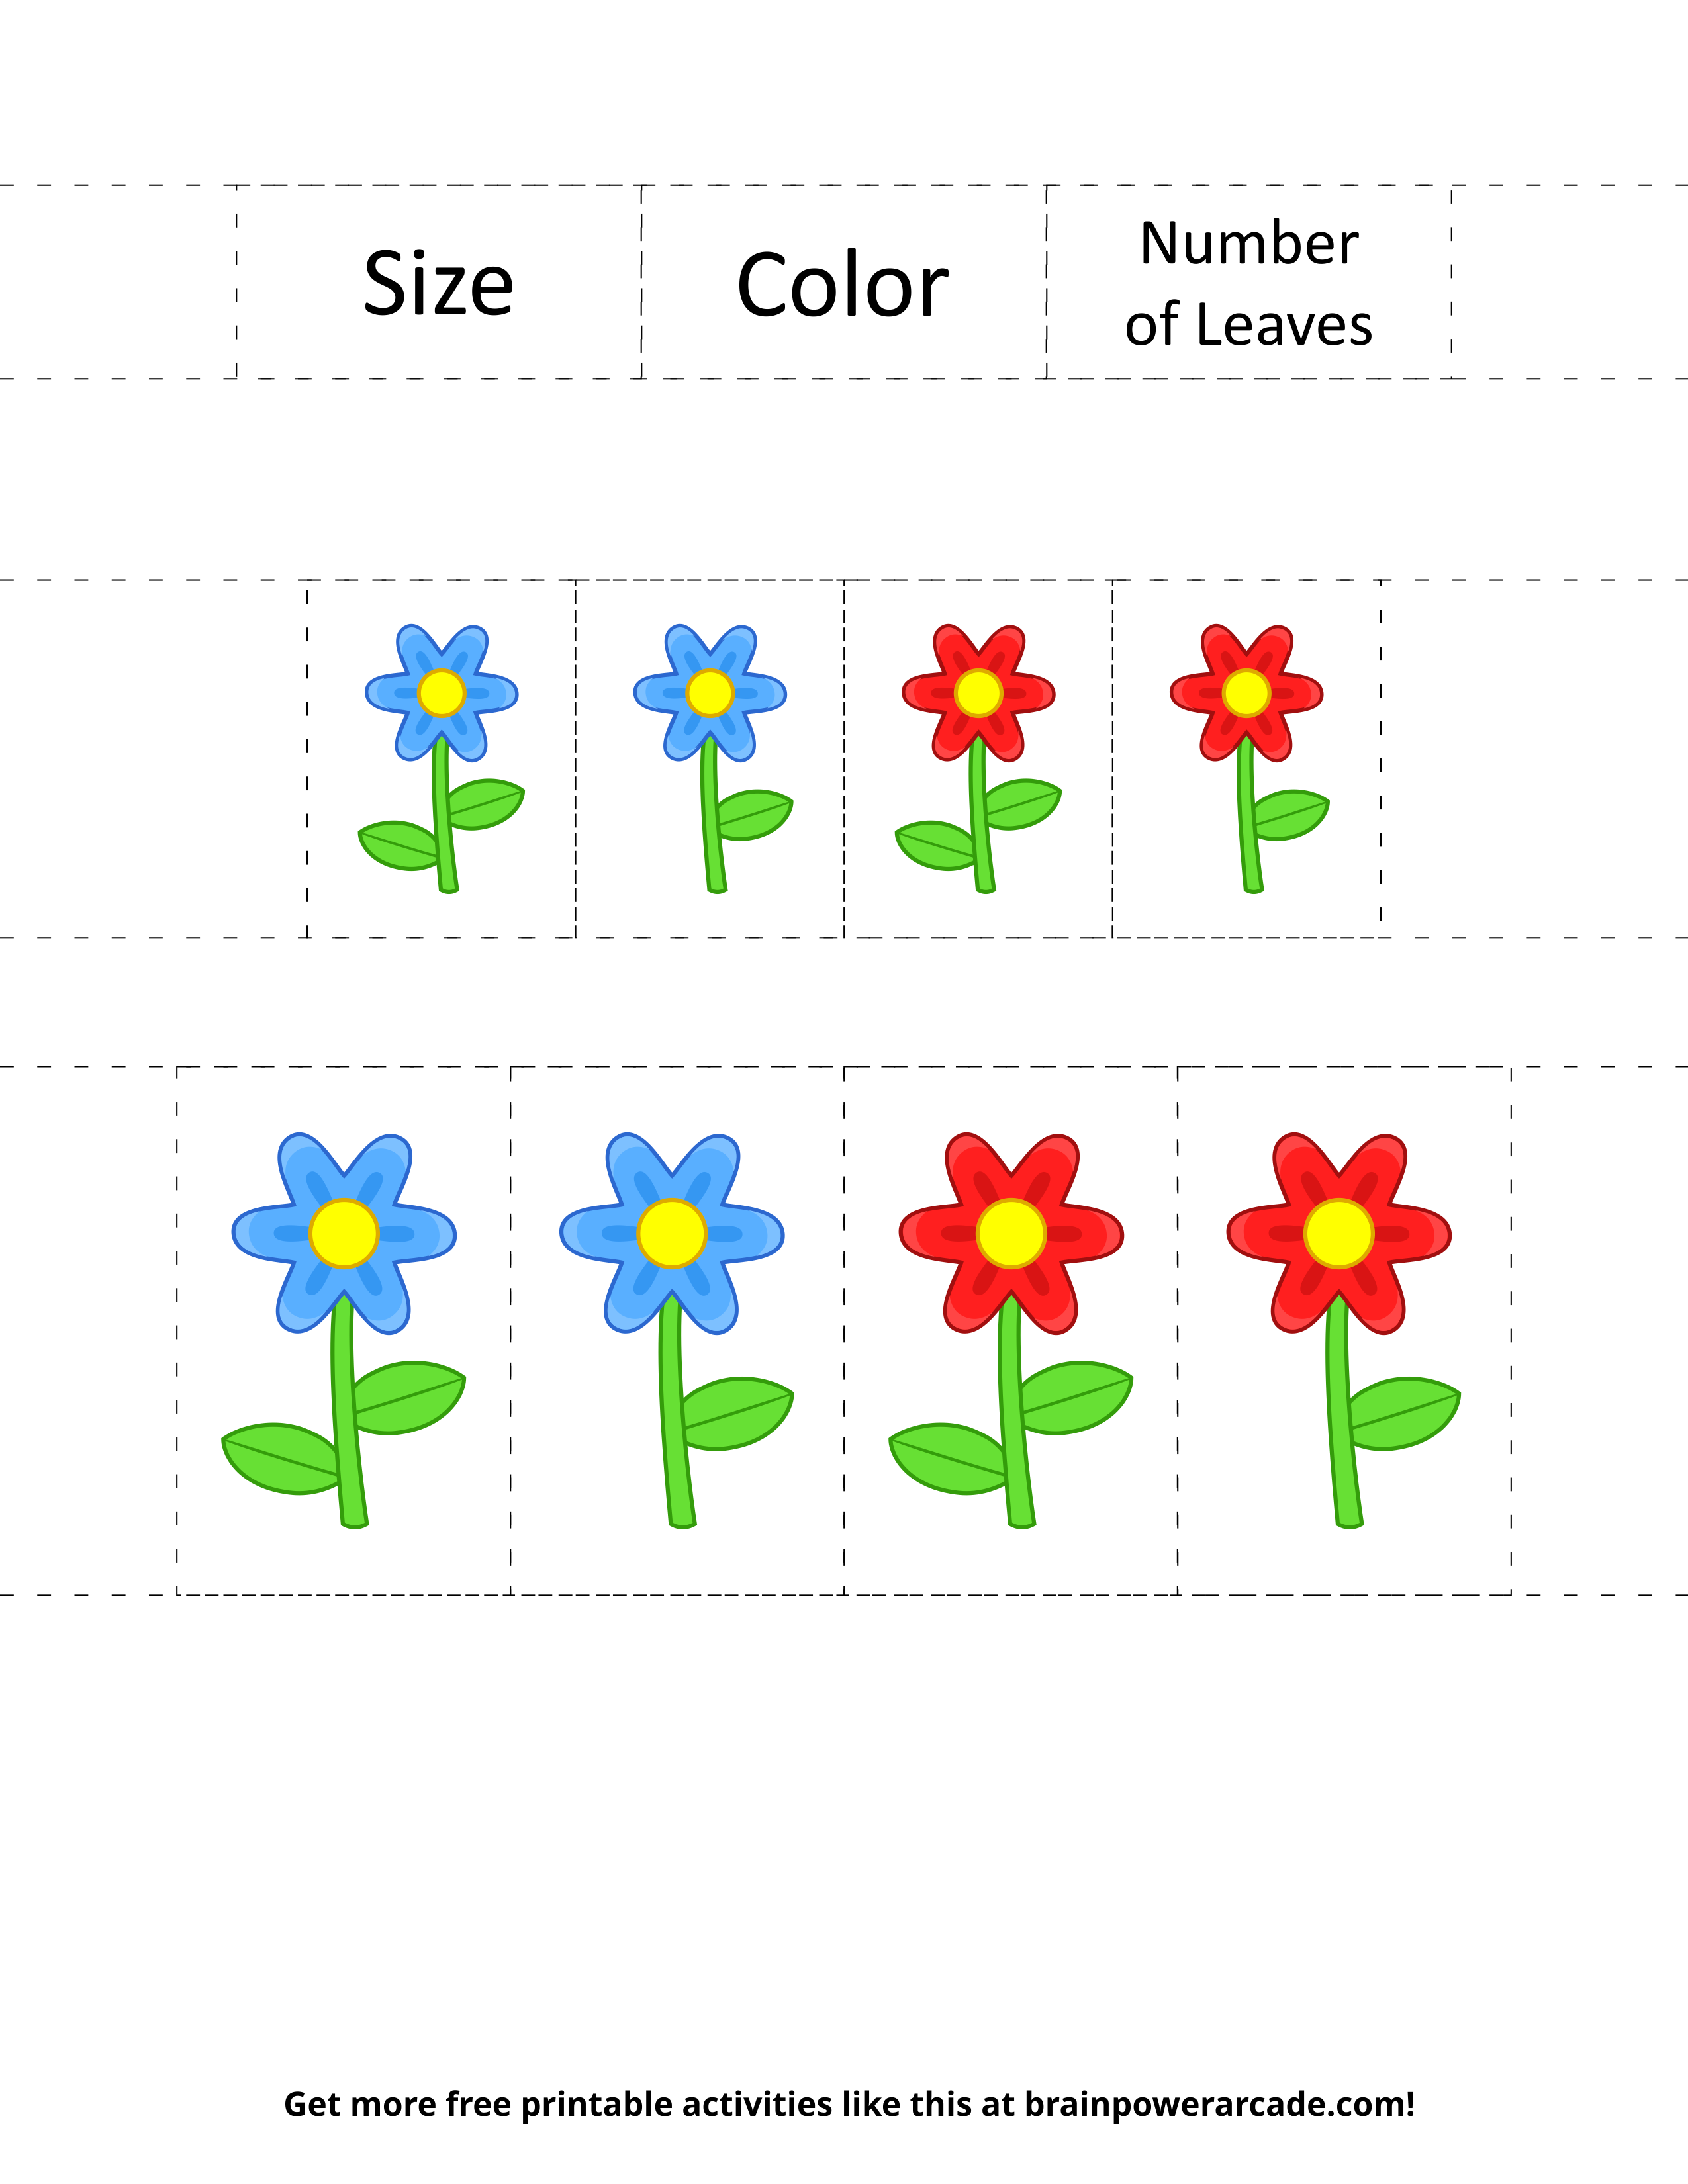 Sort Flowers By Color, Size, or Number of Leaves (Page 2)